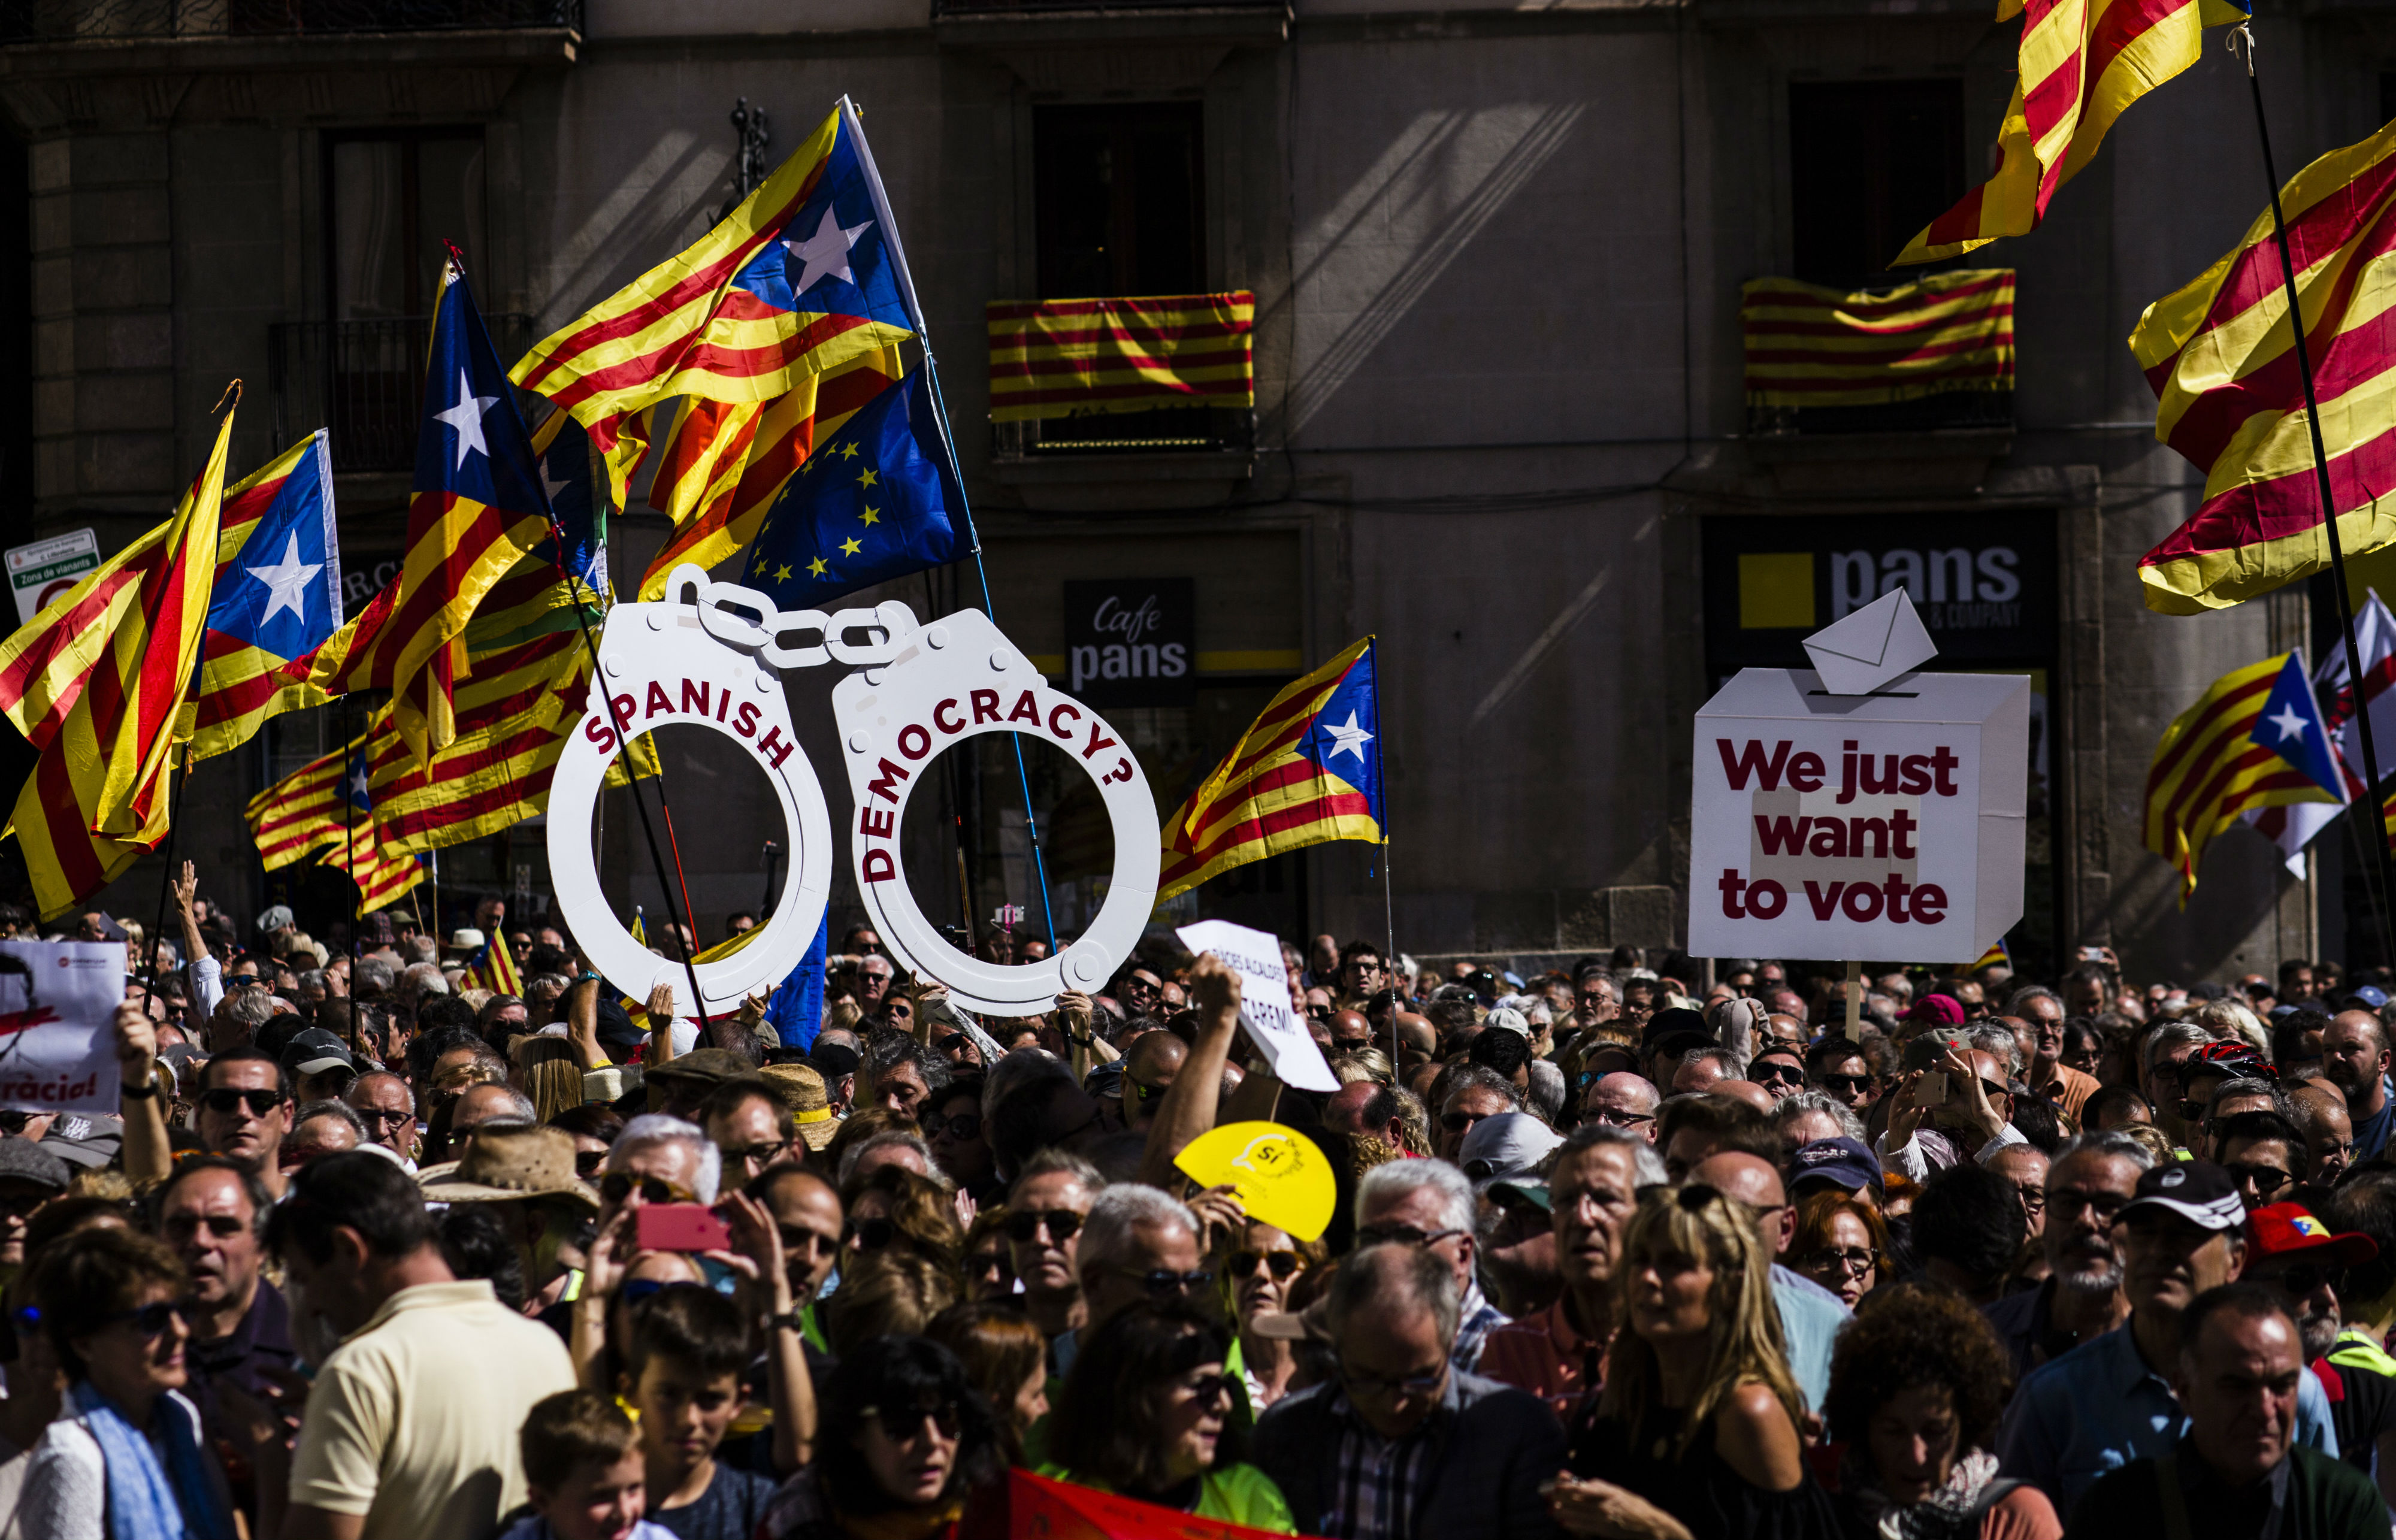 Catalan bishops urge calm ahead of Sunday's controversial vote